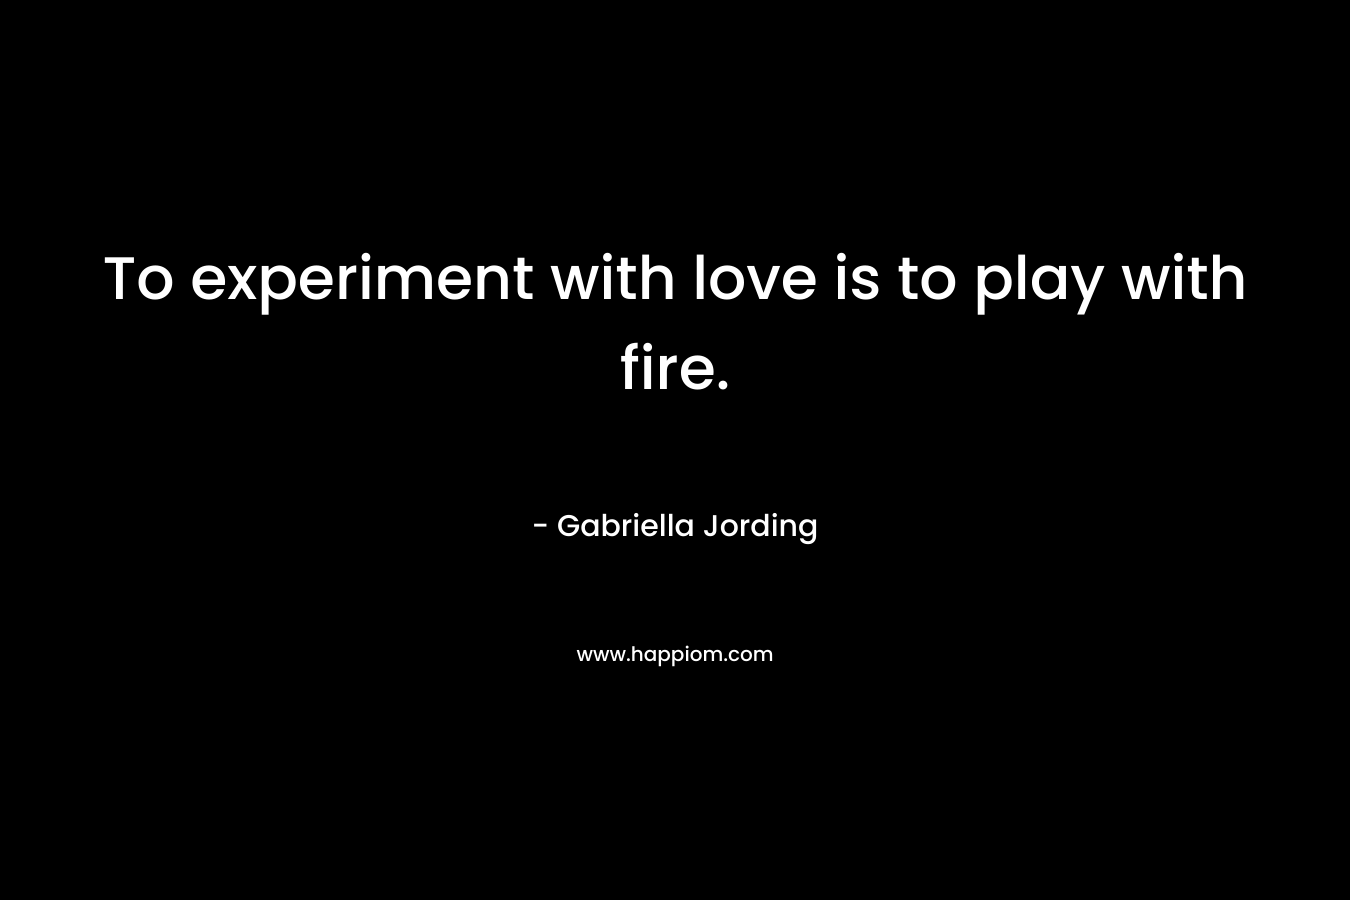 To experiment with love is to play with fire.